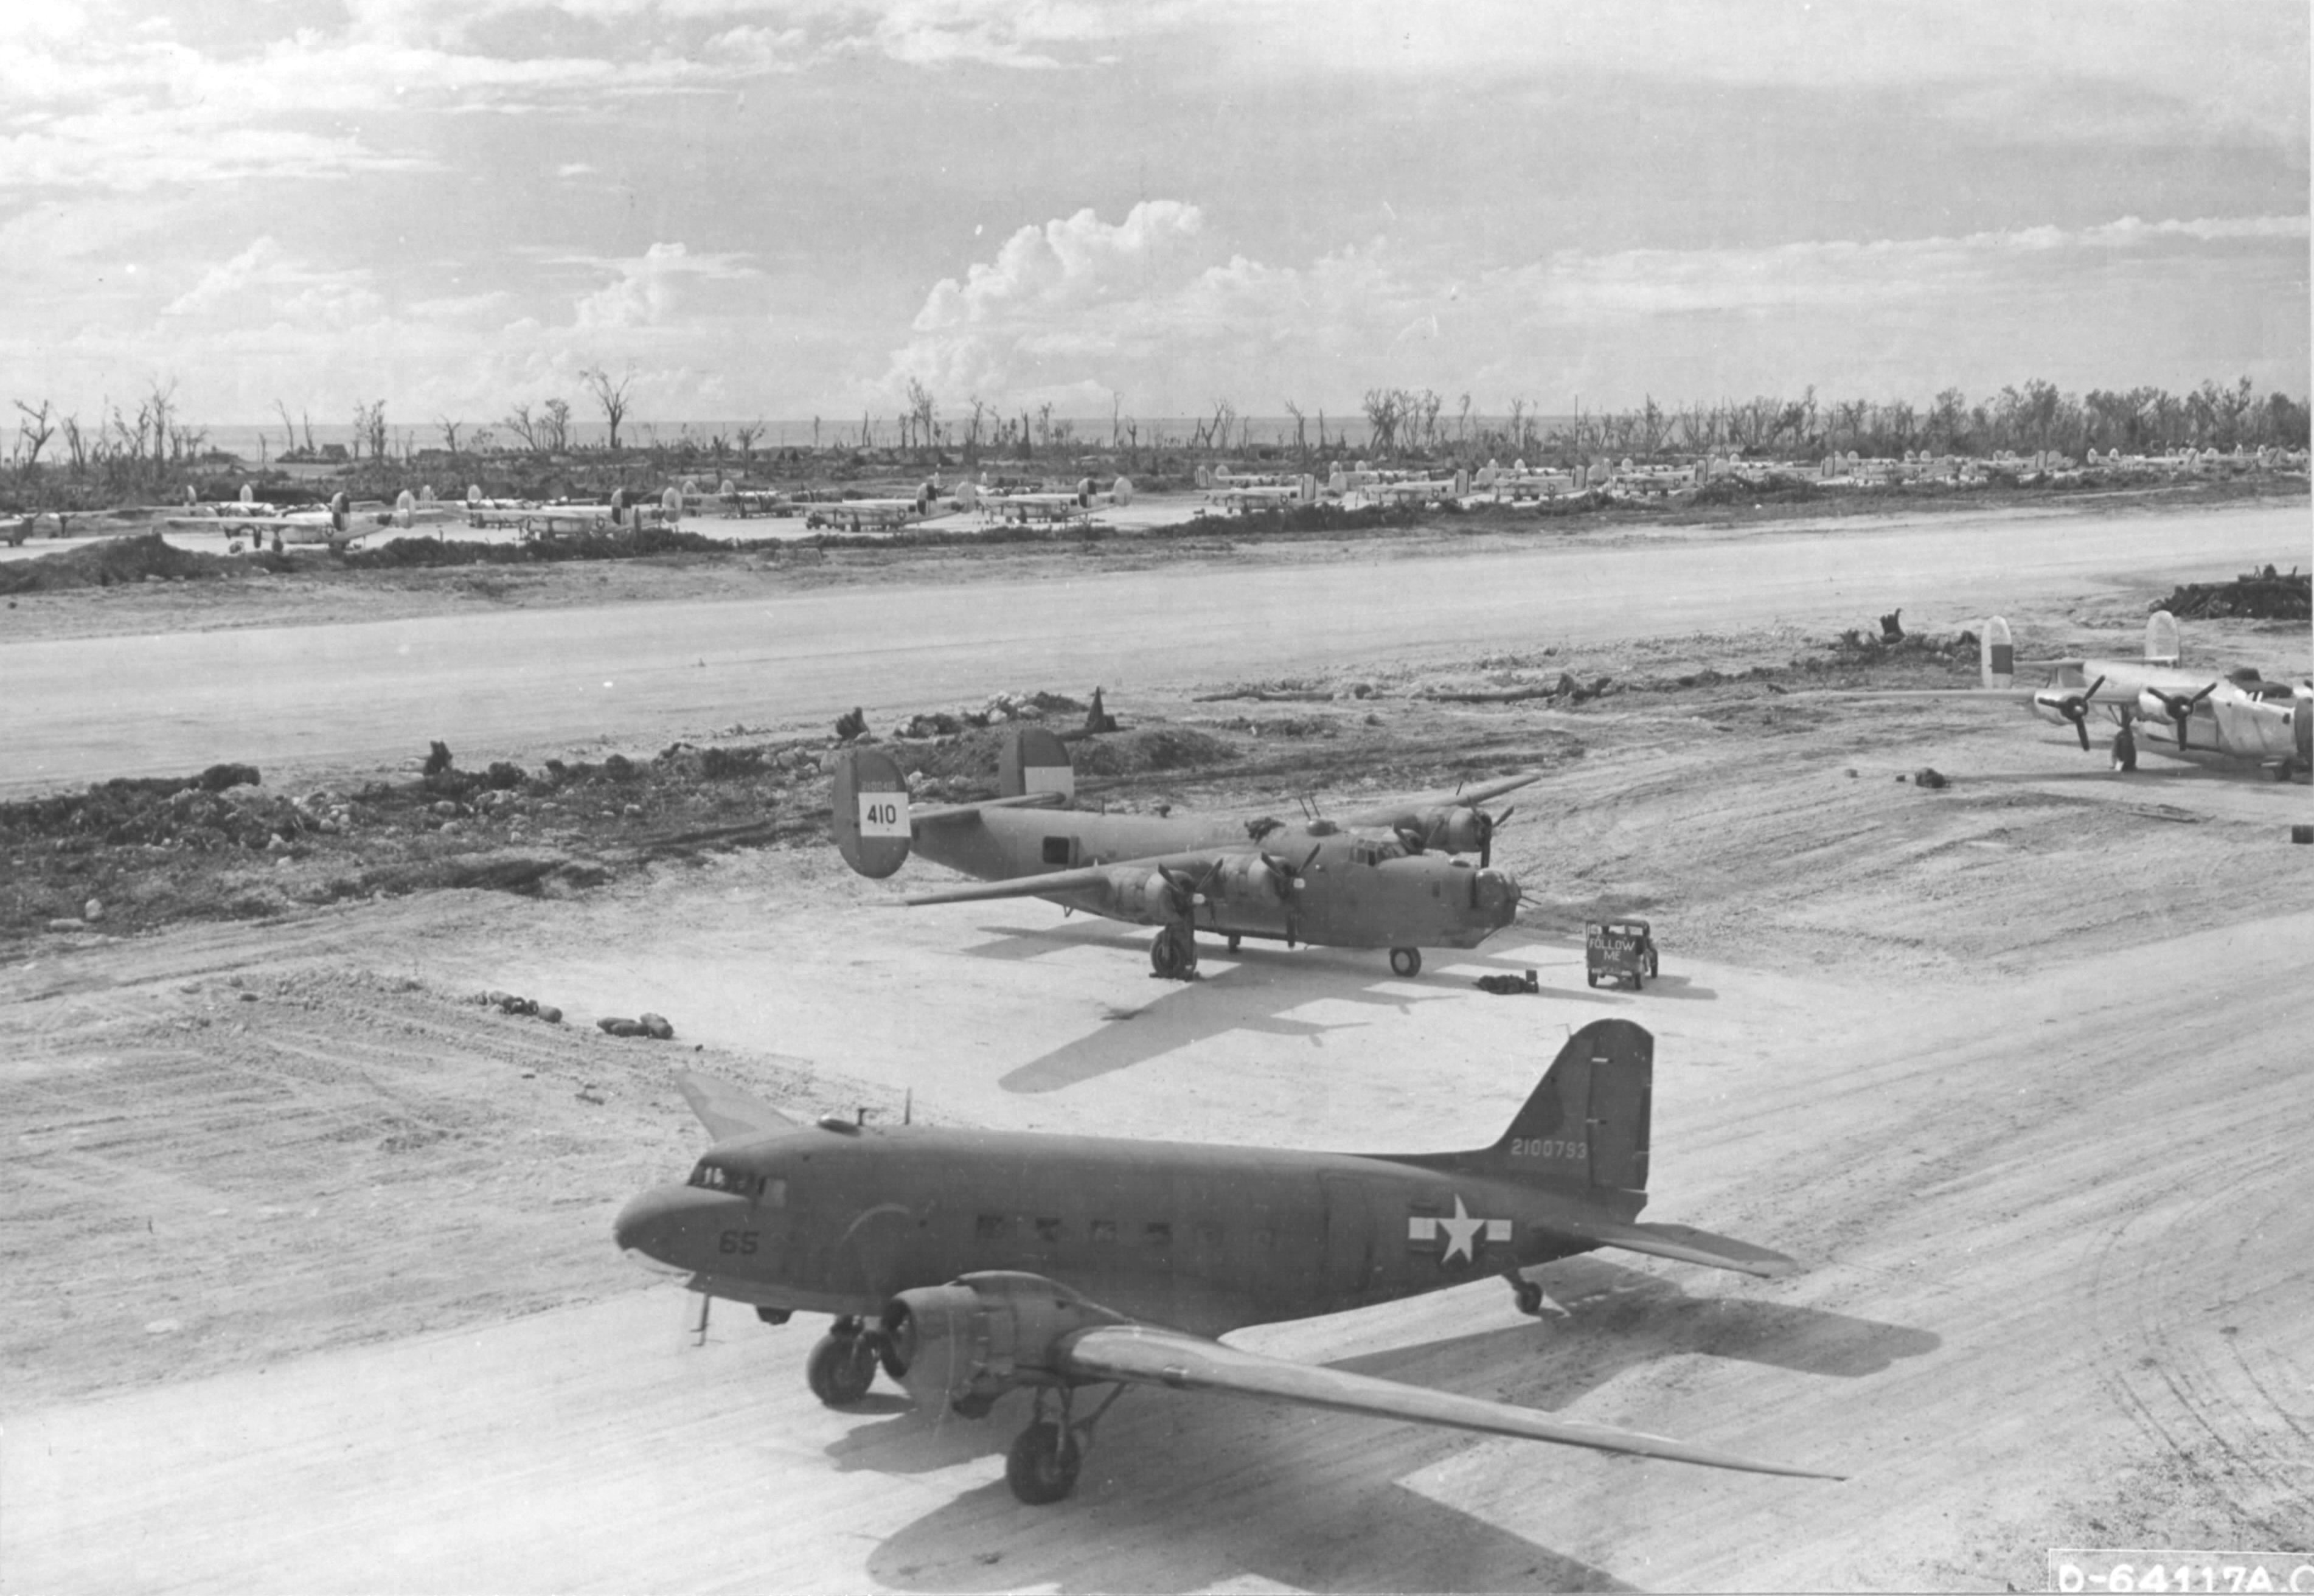 The airstrip at Angaur, Palau Islands Dec 9 1944 with B-24Js of the 22nd Bomb Group on the near side and B-24s of the 494th Bomb Group on the far side; plus one C-47A Skytrain supply aircraft.